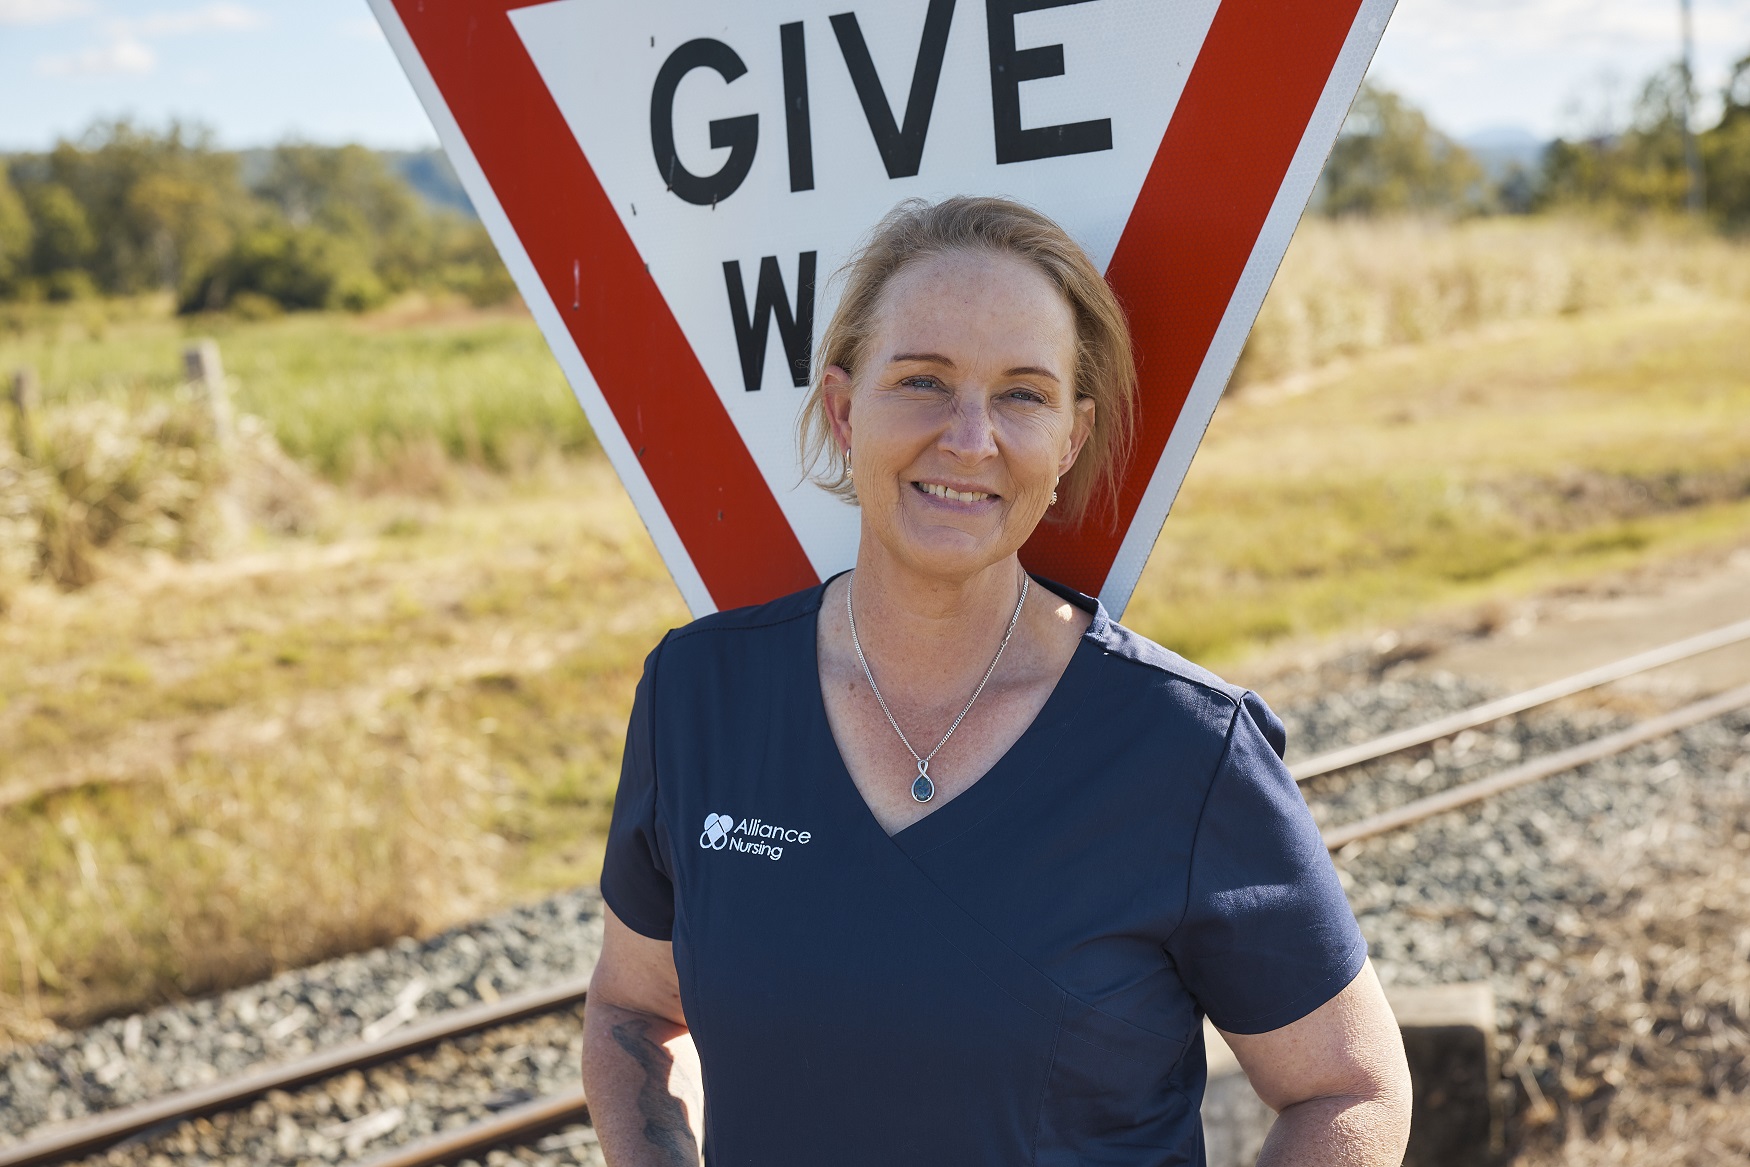 Nurse smiling near give way sign